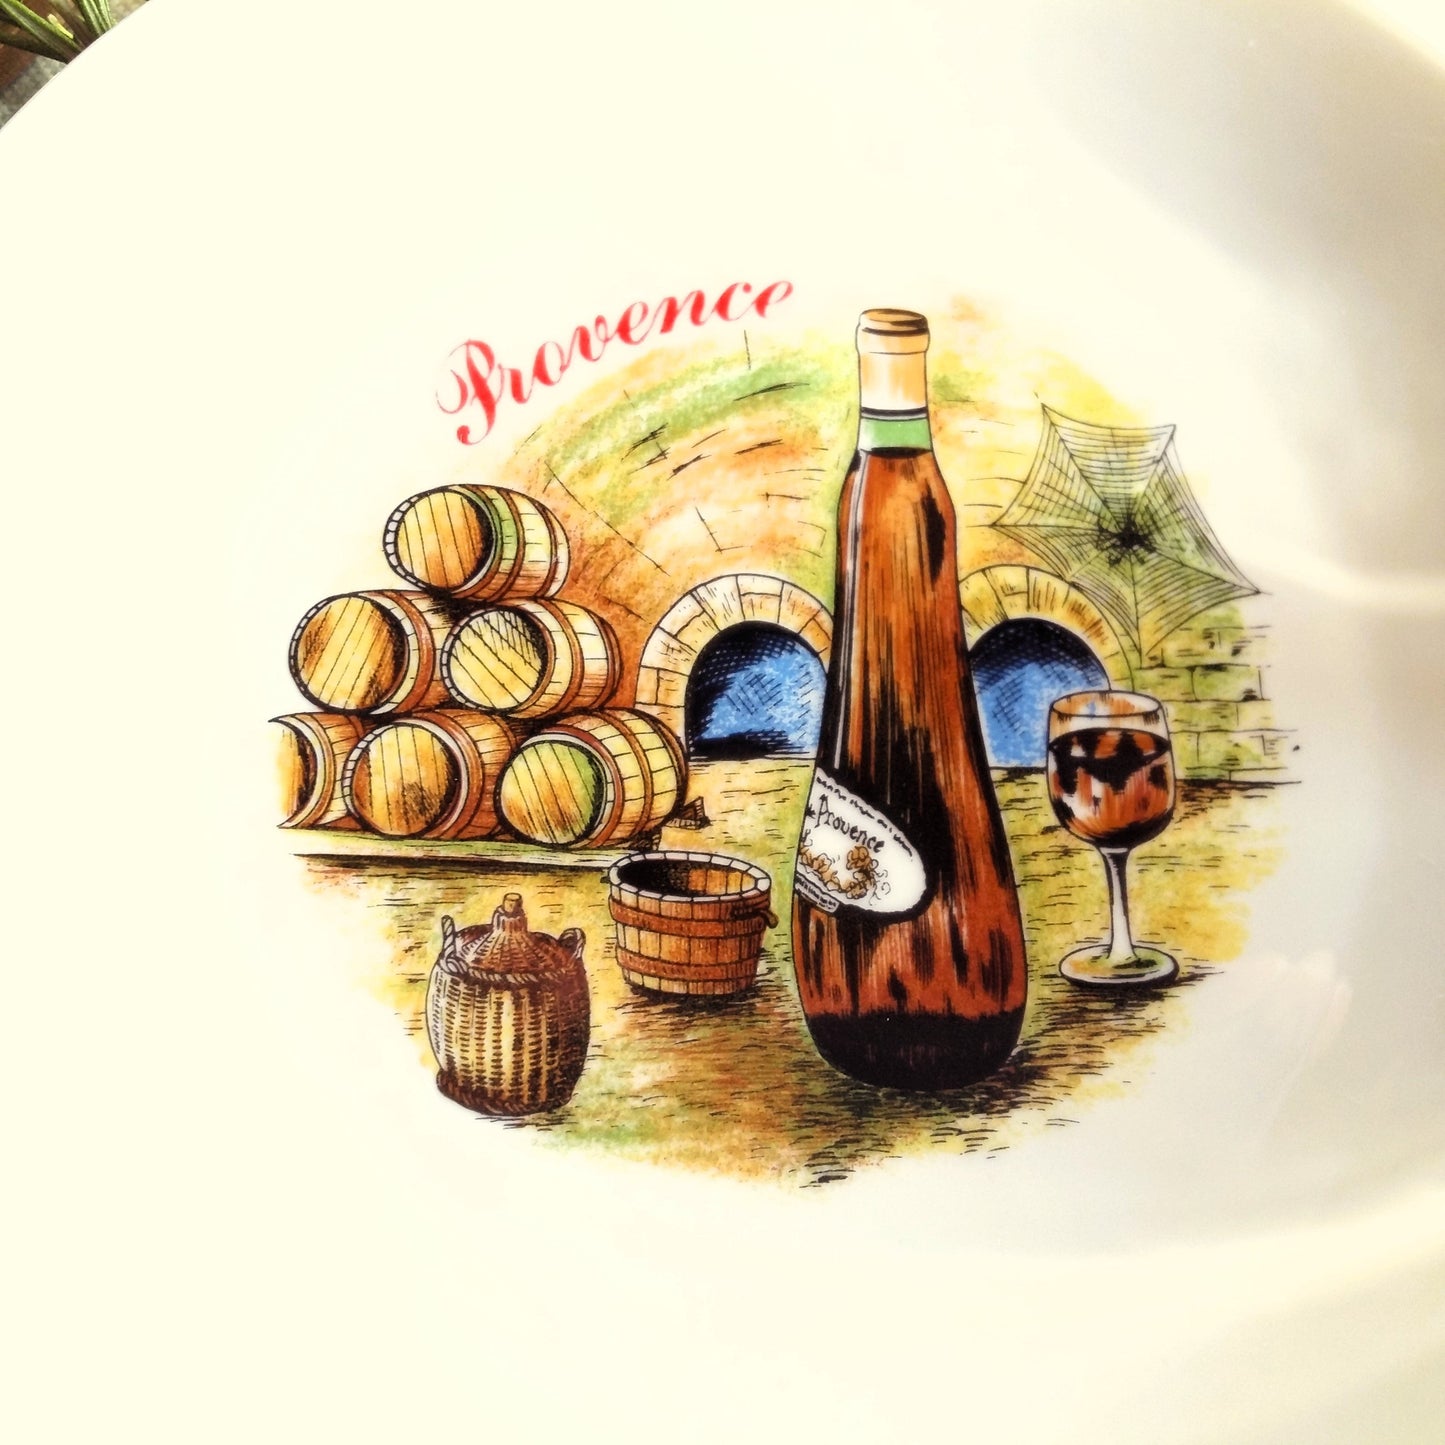 EIGHT Vintage Wine and Cheese Plates from Tiggy & Pip - Just €160! Shop now at Tiggy and Pip